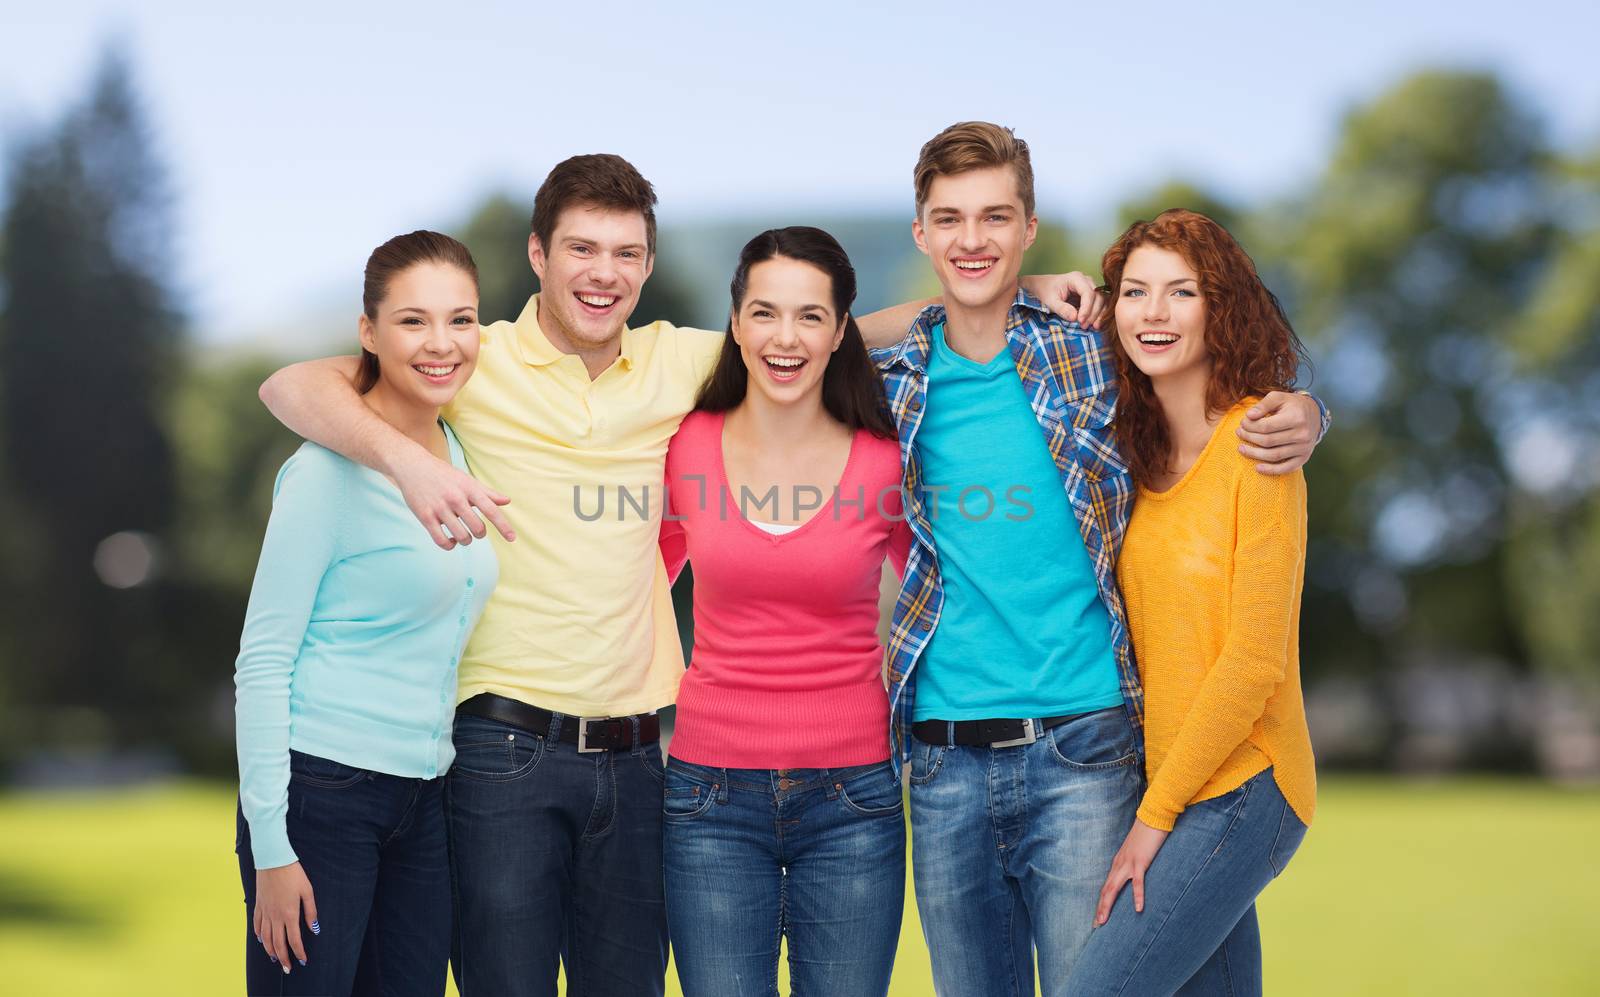 friendship, summer vacation, nature and people concept - group of smiling teenagers standing and embracing over green park background